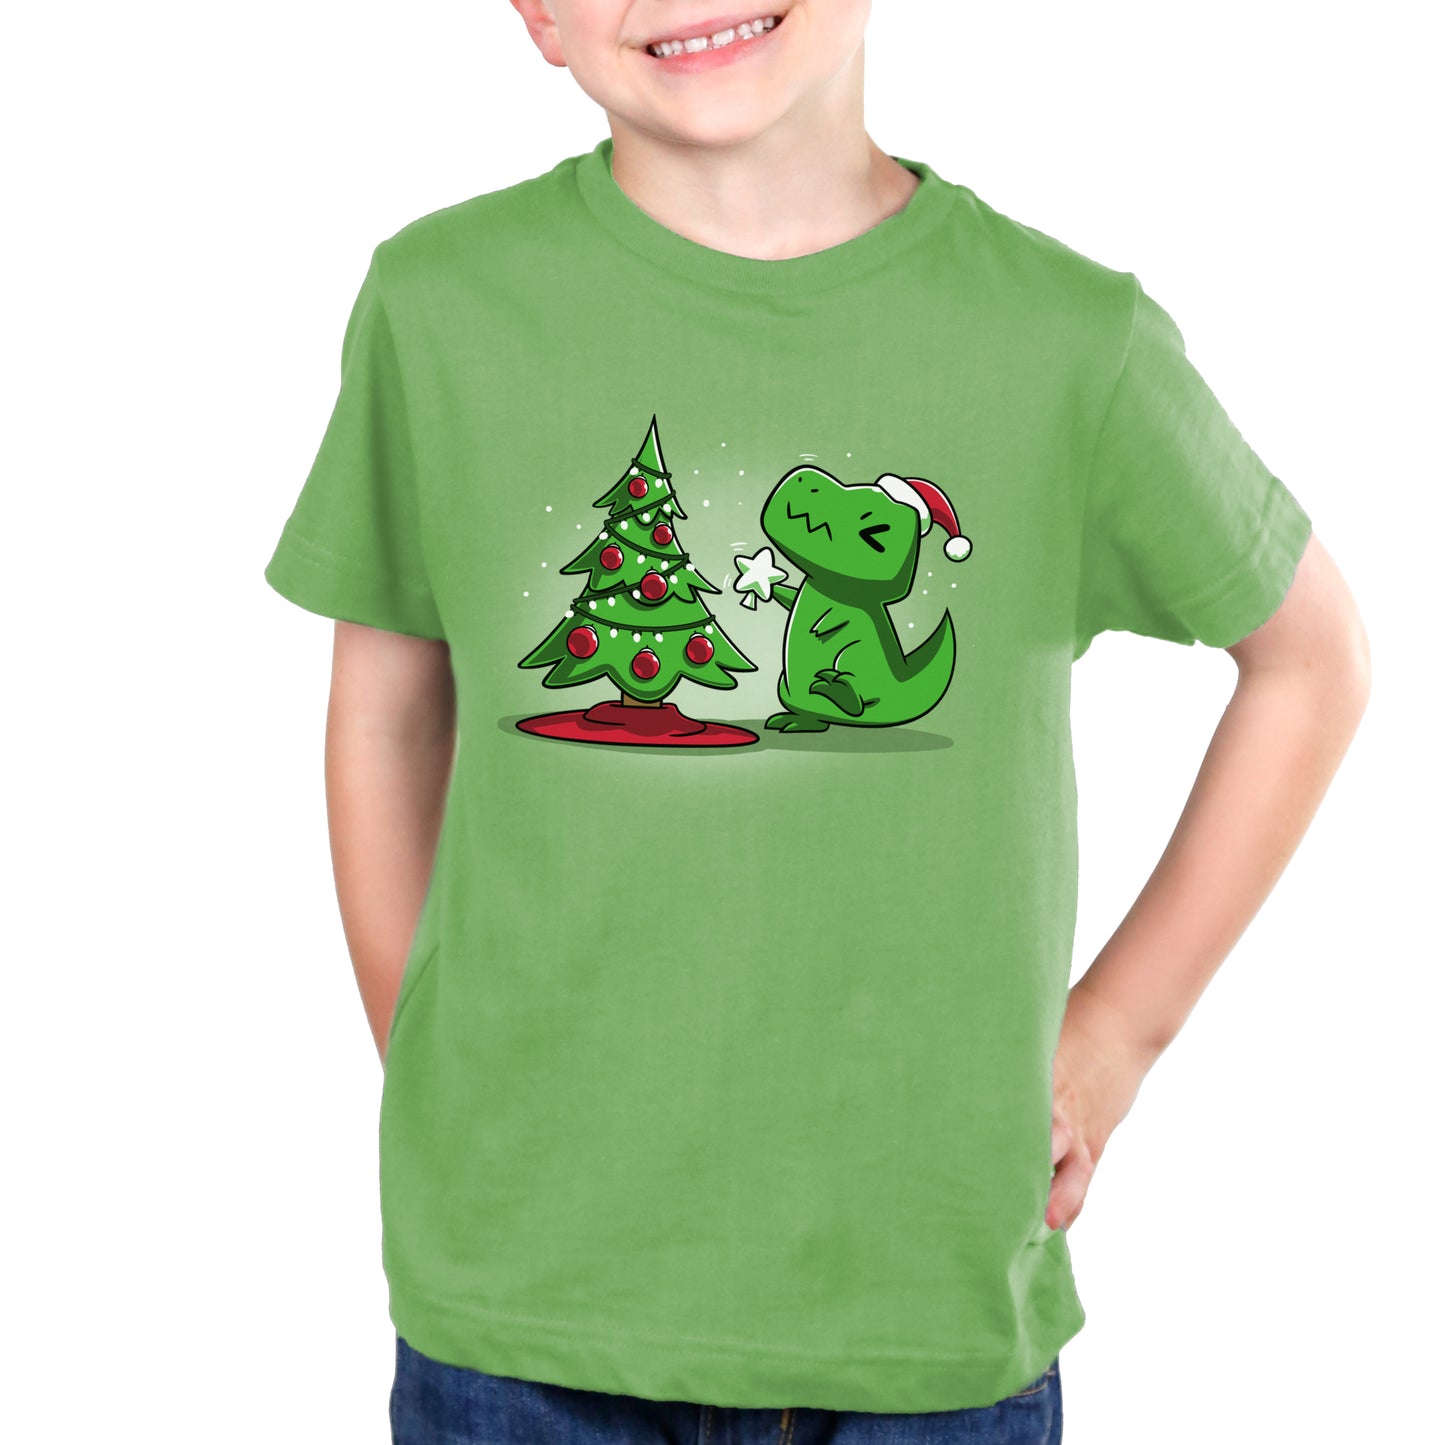 A young boy wearing a TeeTurtle Christmas T-Rex t-shirt next to a Christmas tree.